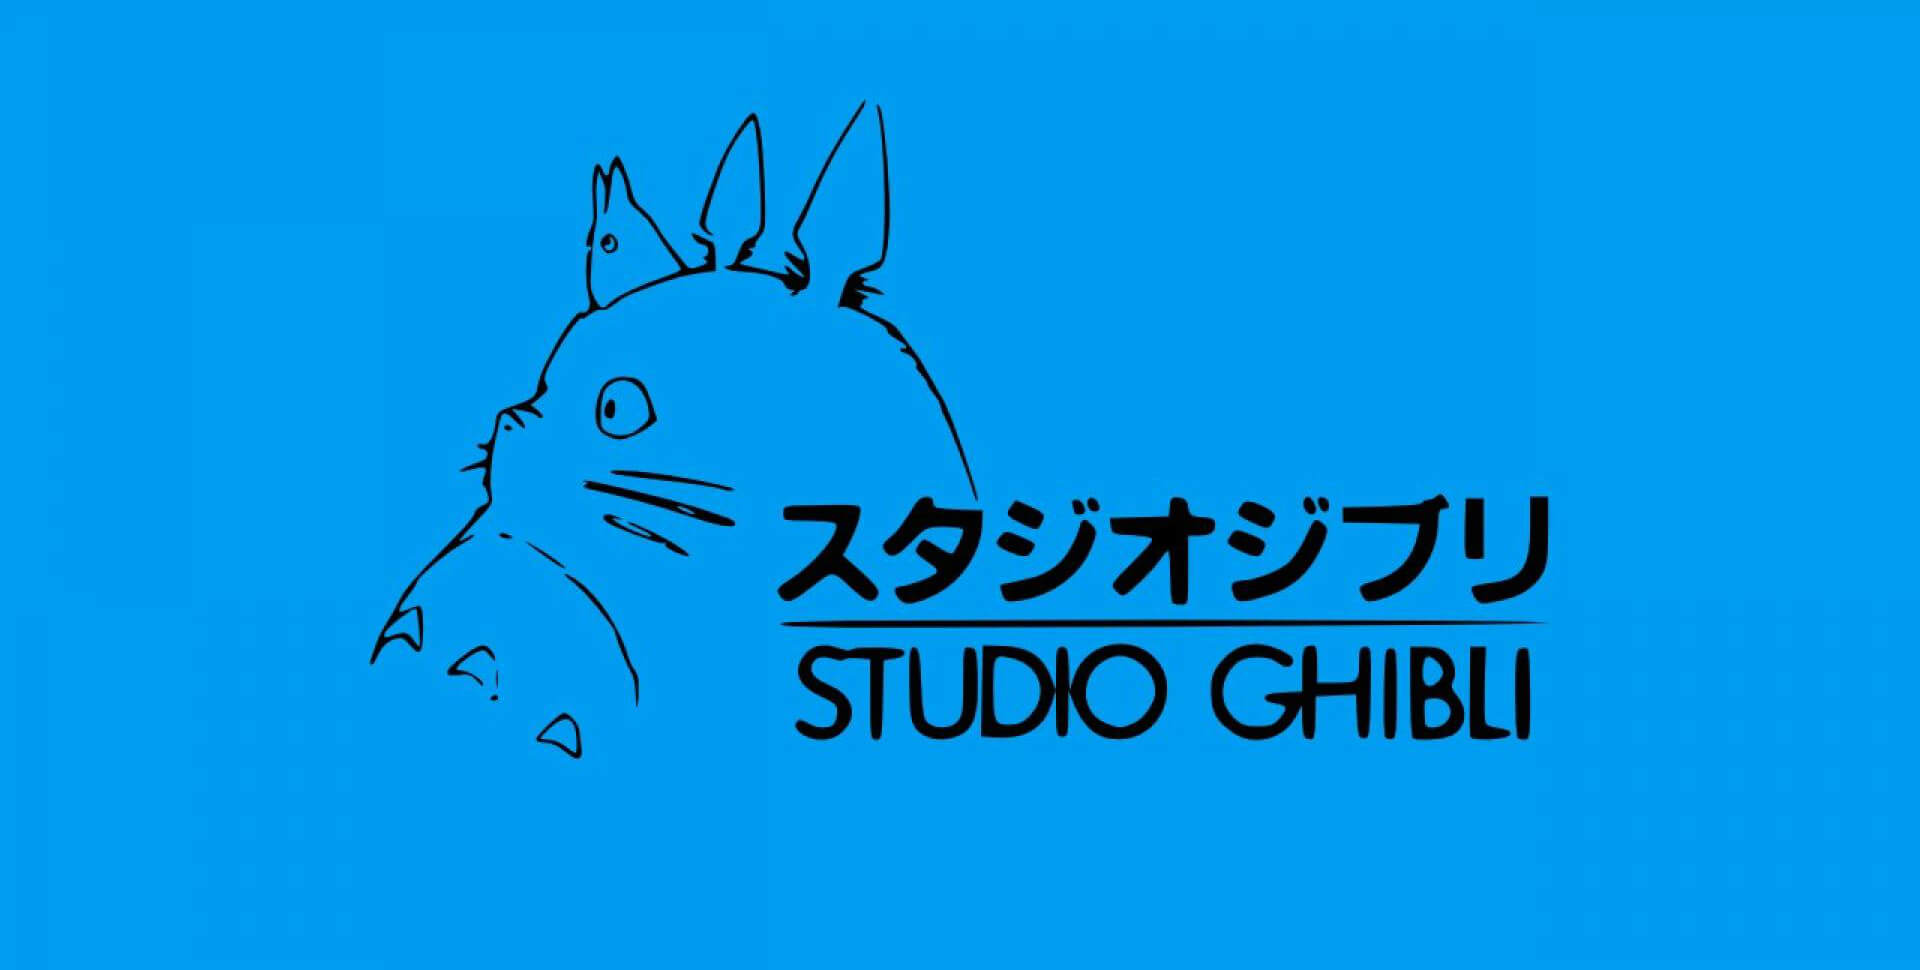 Studio Ghibli Movies Ranked From Worst to Best - Borrowing ...